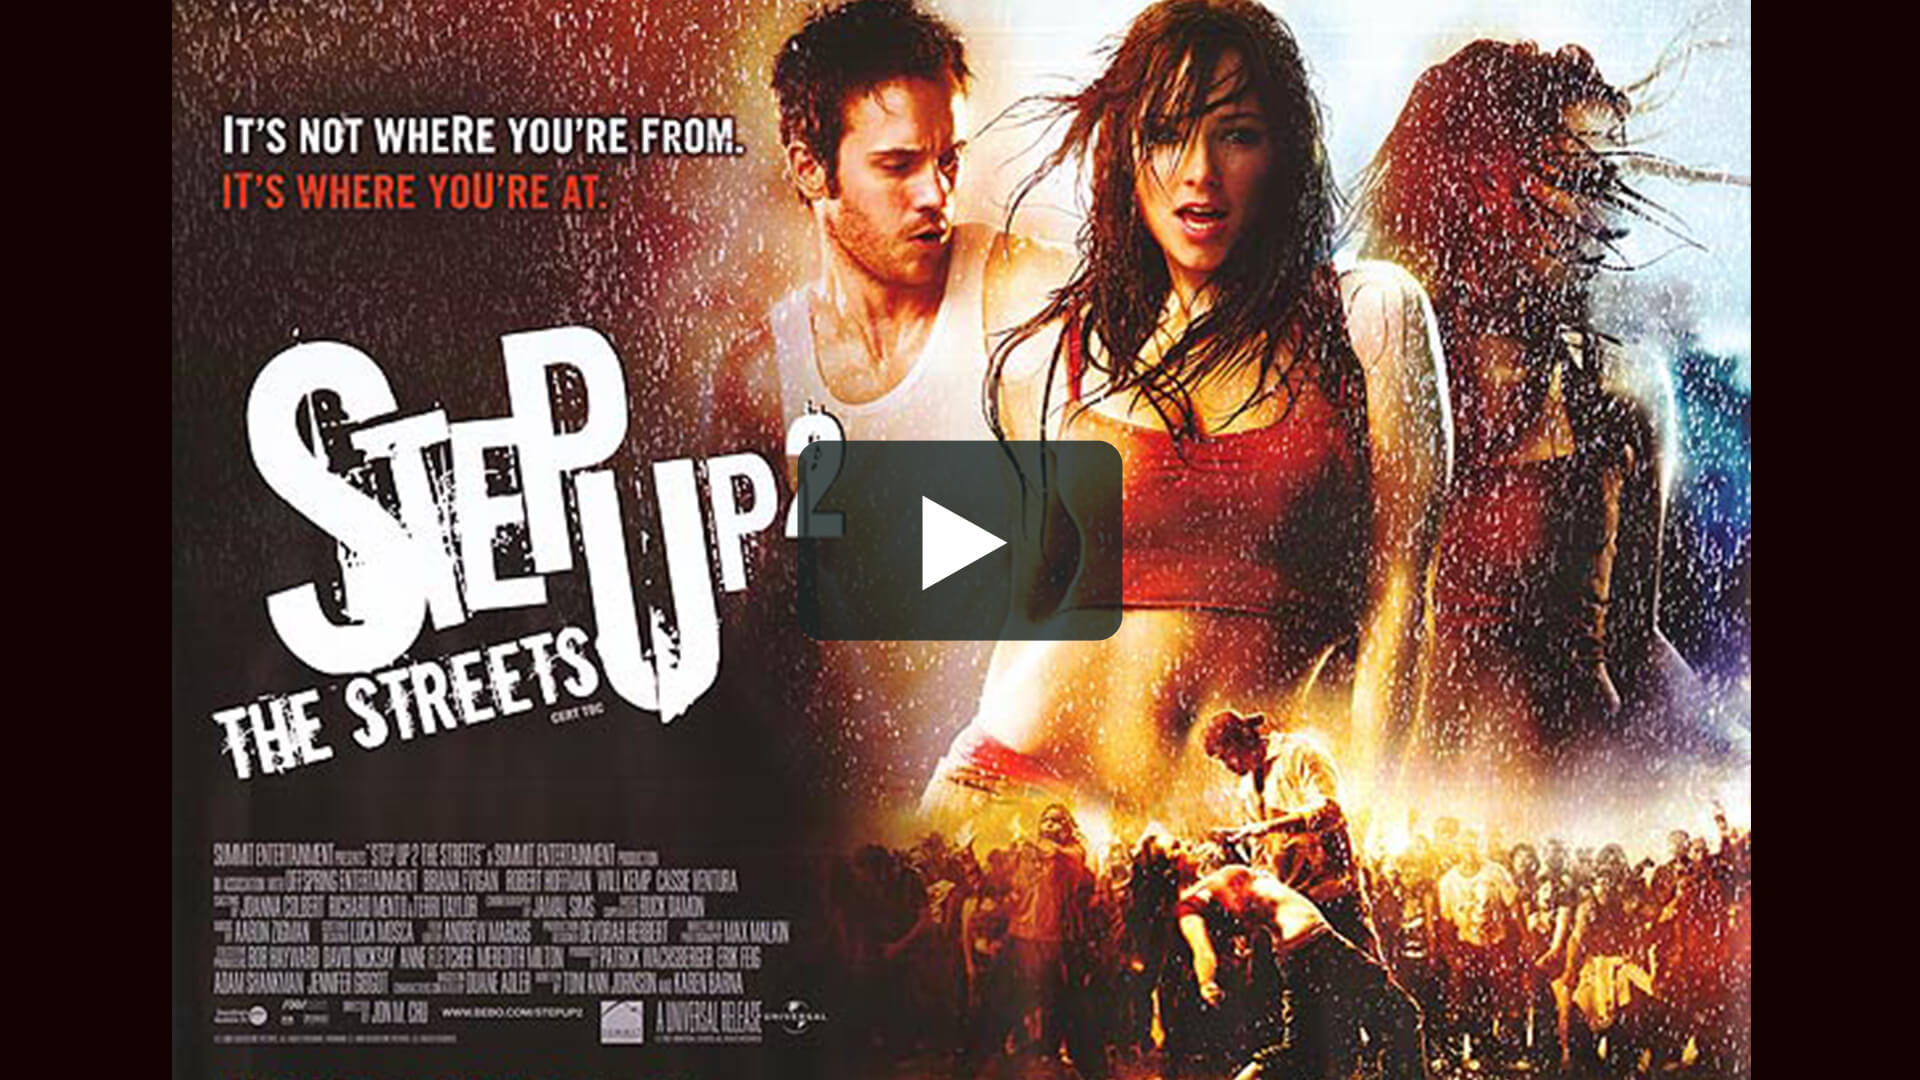 Step Up 2: The Streets - 舞出我人生2：街舞